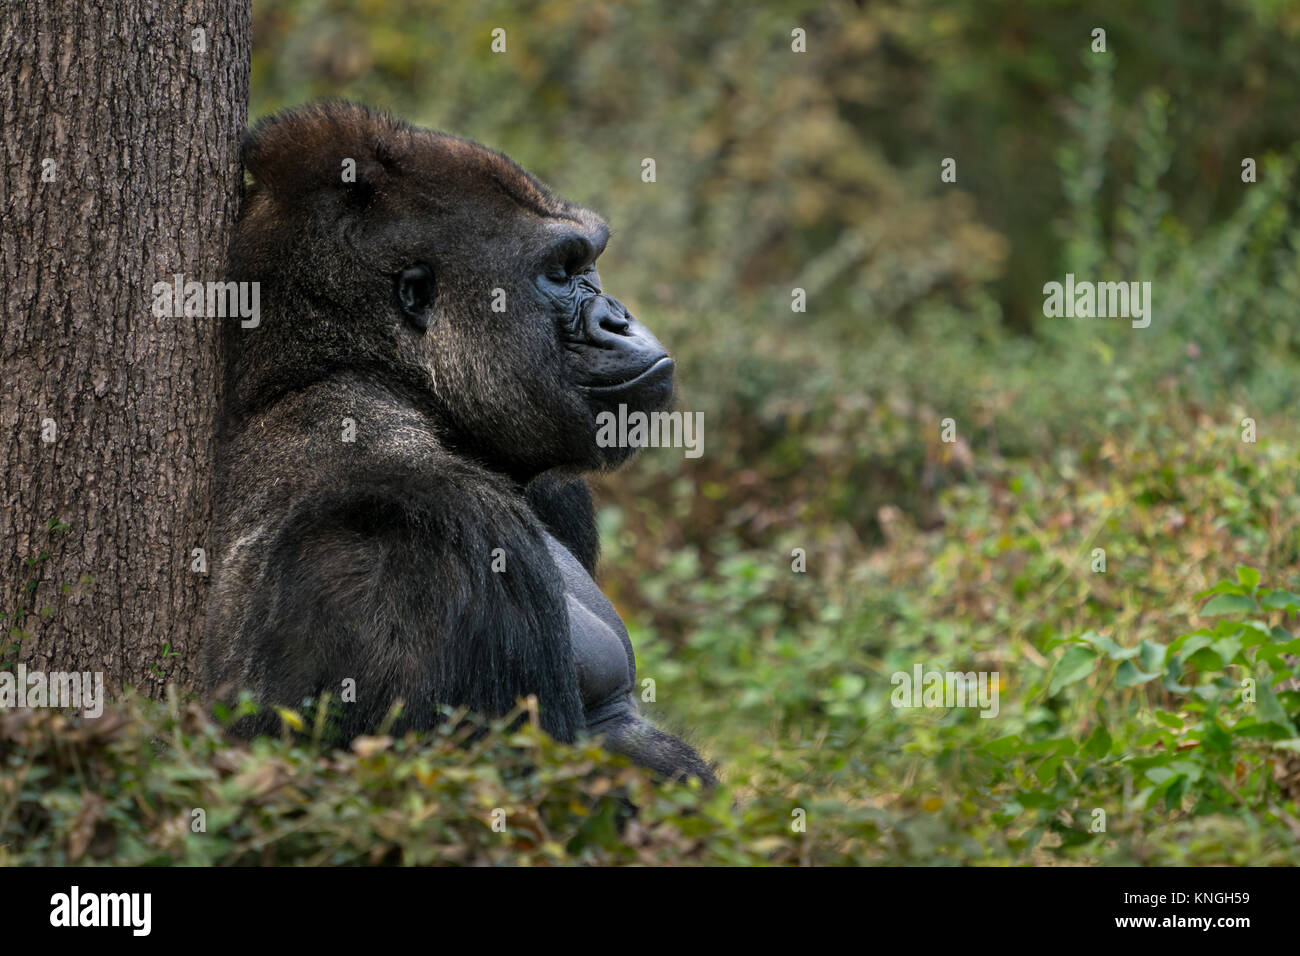 Western Lowland Gorilla Sitting and Sleeping on Grass Against a Tree Trunk Stock Photo